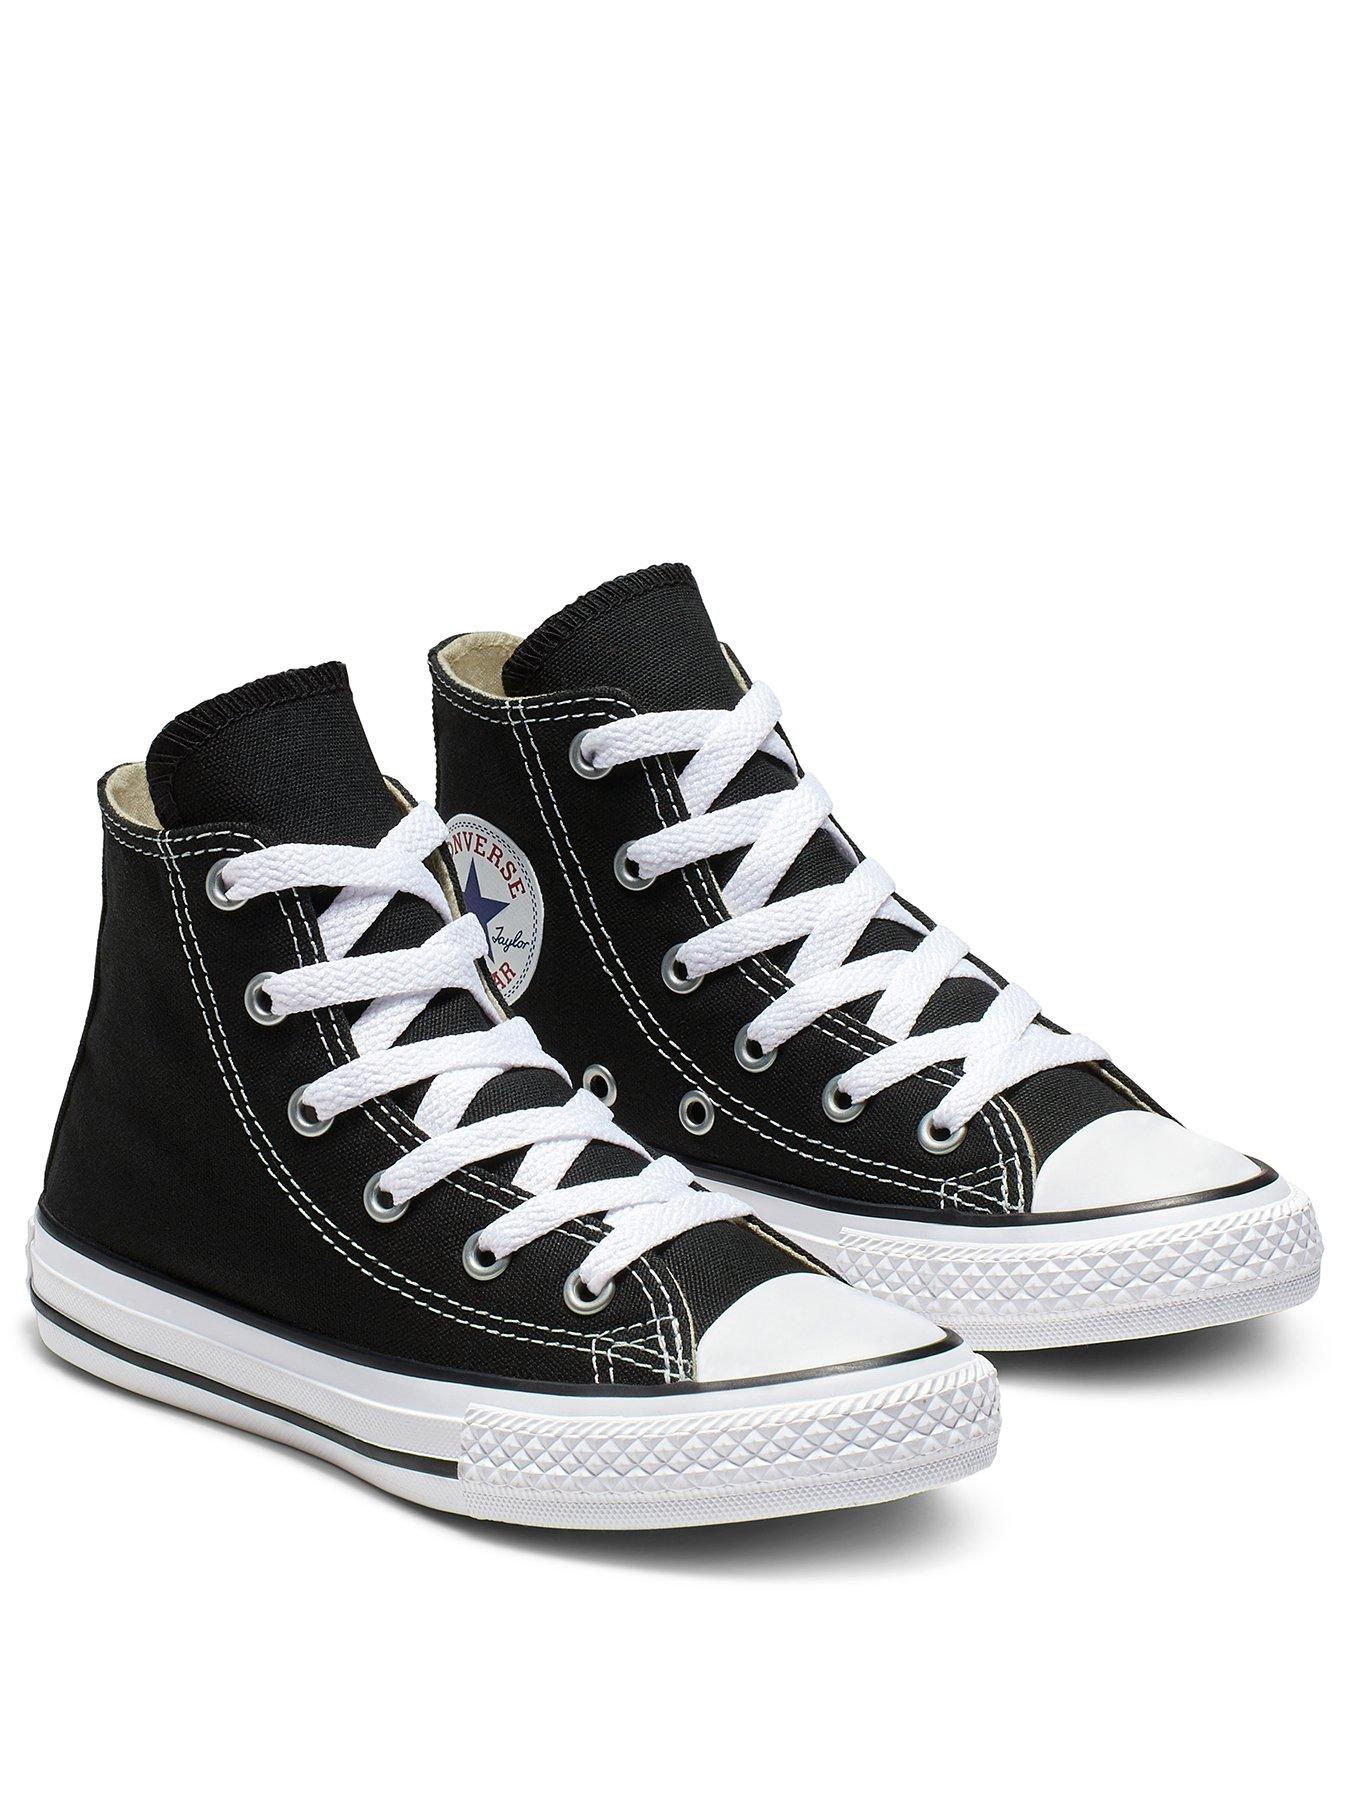 Trainers Chuck Taylor All Star Ox Childrens Unisex Trainers -Black